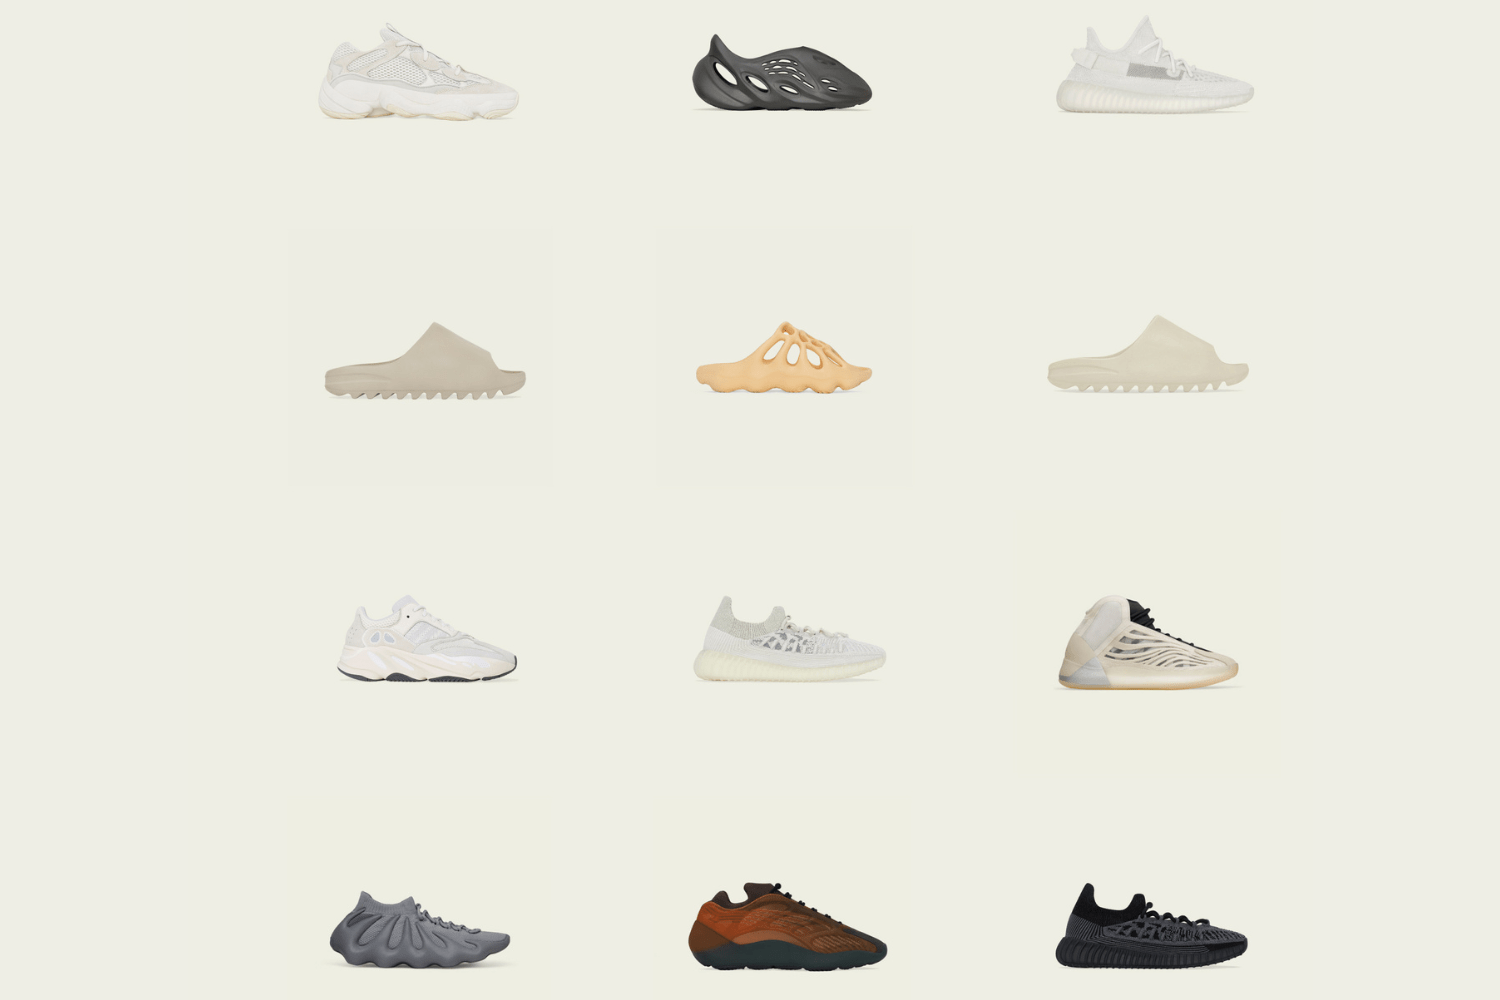 What you need to know about the adidas YEEZY restock